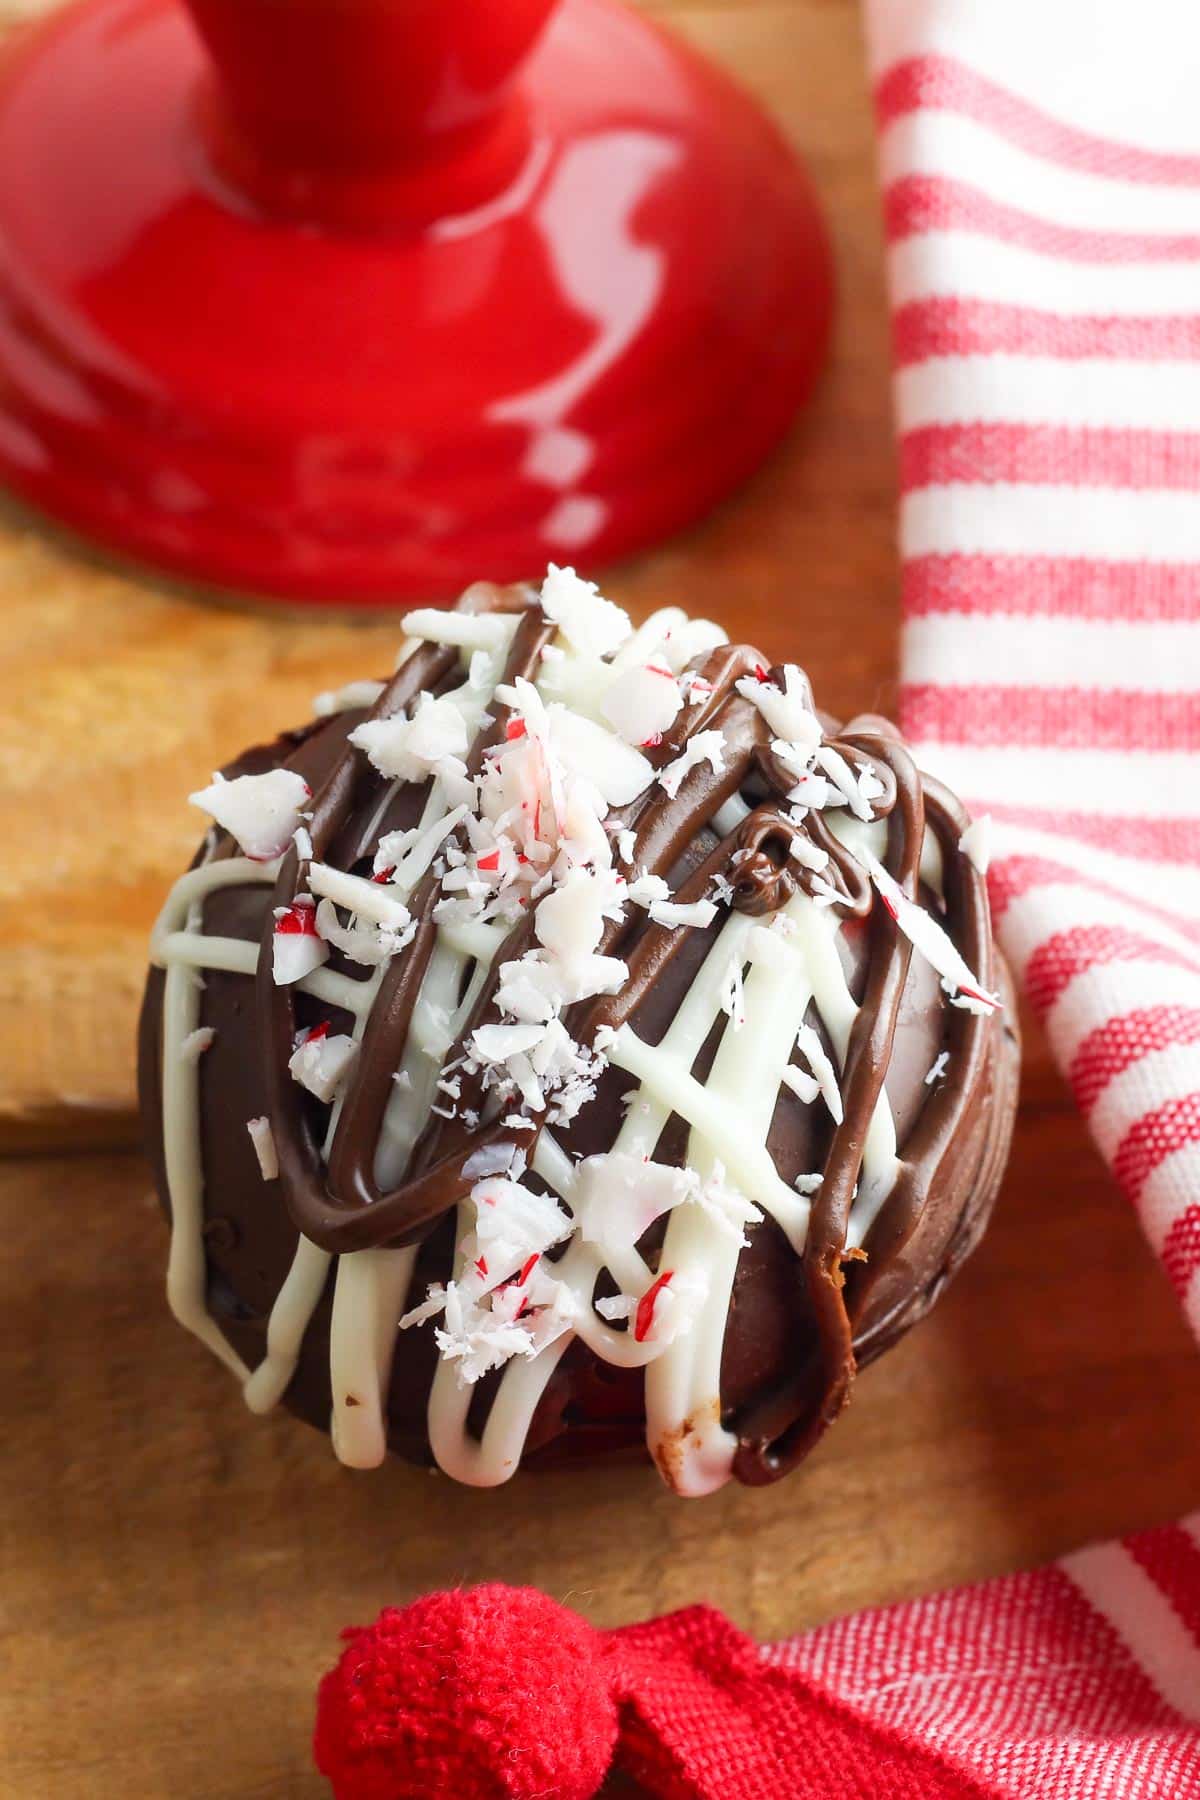 HOT CHOCOLATE BOMBS WITH PEPPERMINT